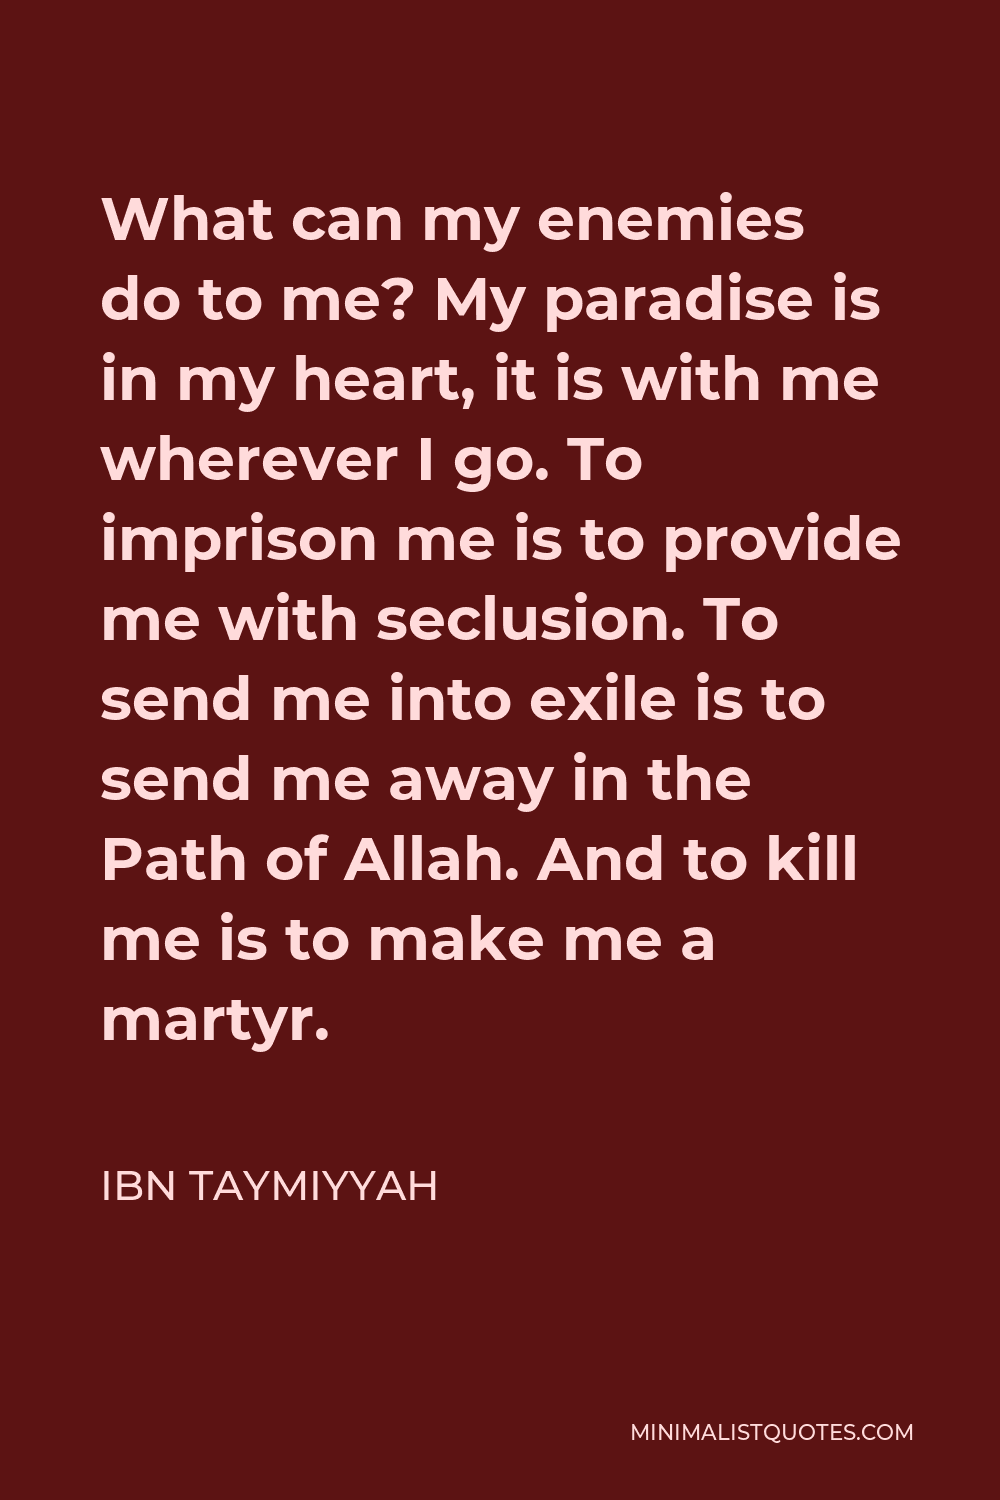 Ibn Taymiyyah Quote - What can my enemies do to me? My paradise is in my heart, it is with me wherever I go. To imprison me is to provide me with seclusion. To send me into exile is to send me away in the Path of Allah. And to kill me is to make me a martyr.